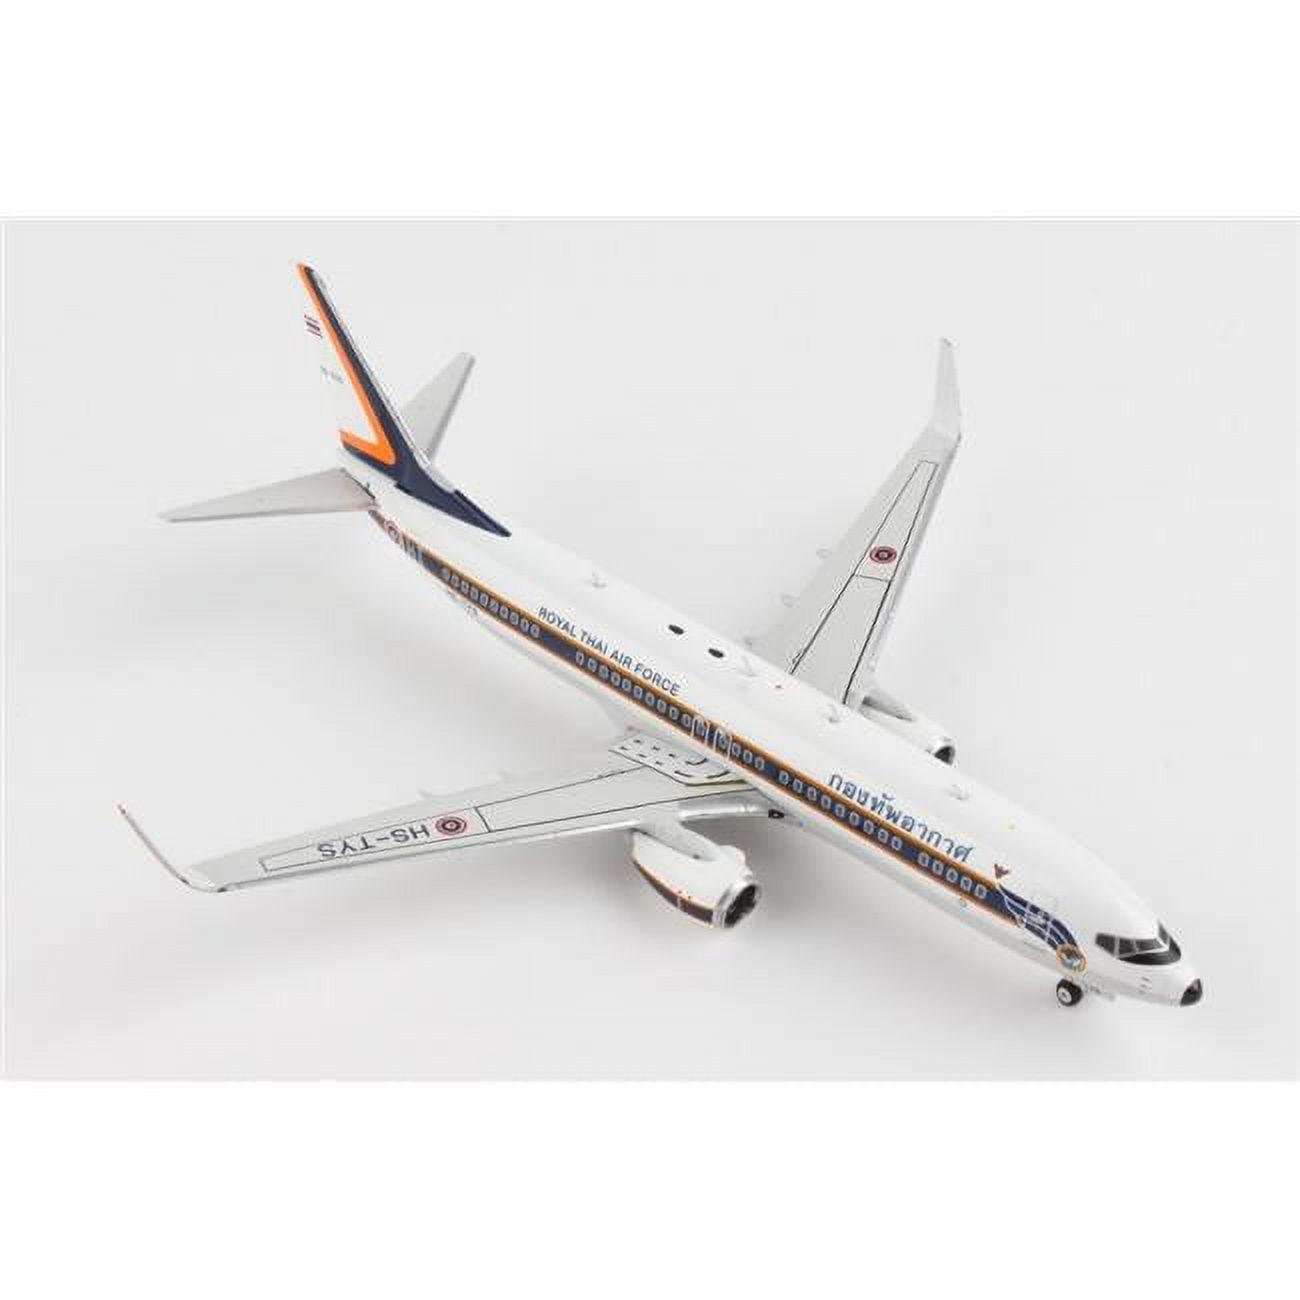 Picture of Phoenix Diecast PH2138 1-400 Scale No.Hs-Tys Reg Royal Thai Air Force 737-800 Model Airplane